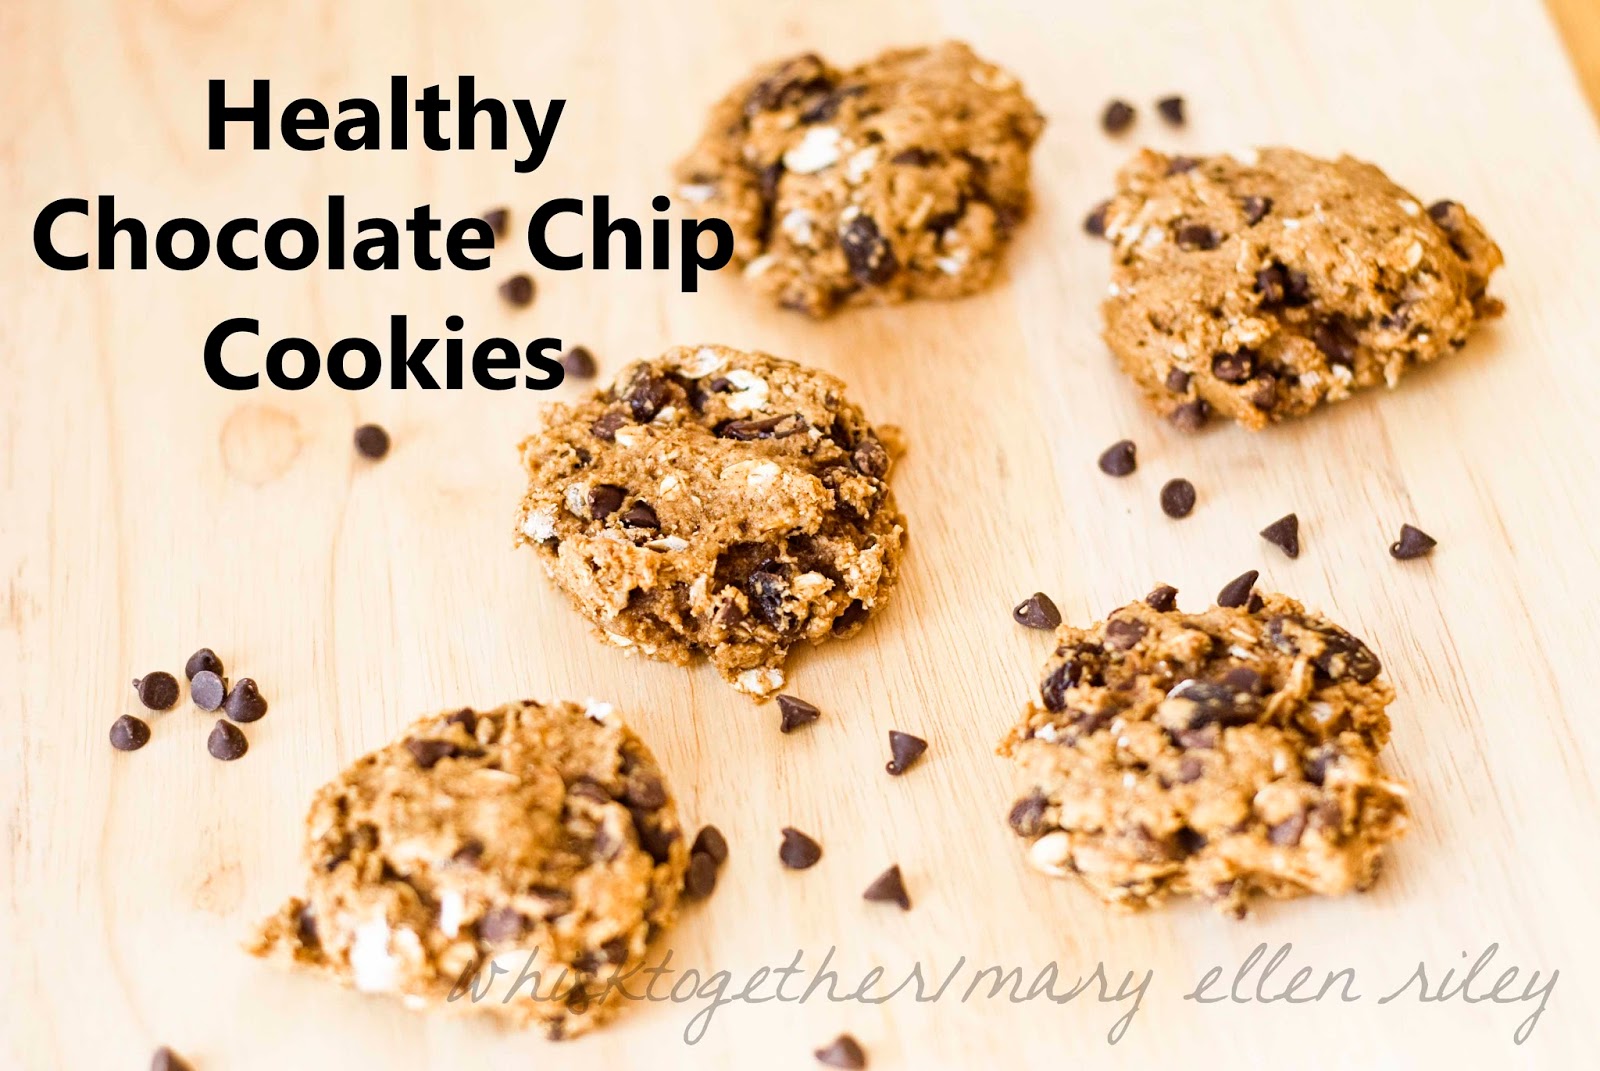 Lifestyle News Daily: The Healthy Recipe For No-Bake Cookies – You Won